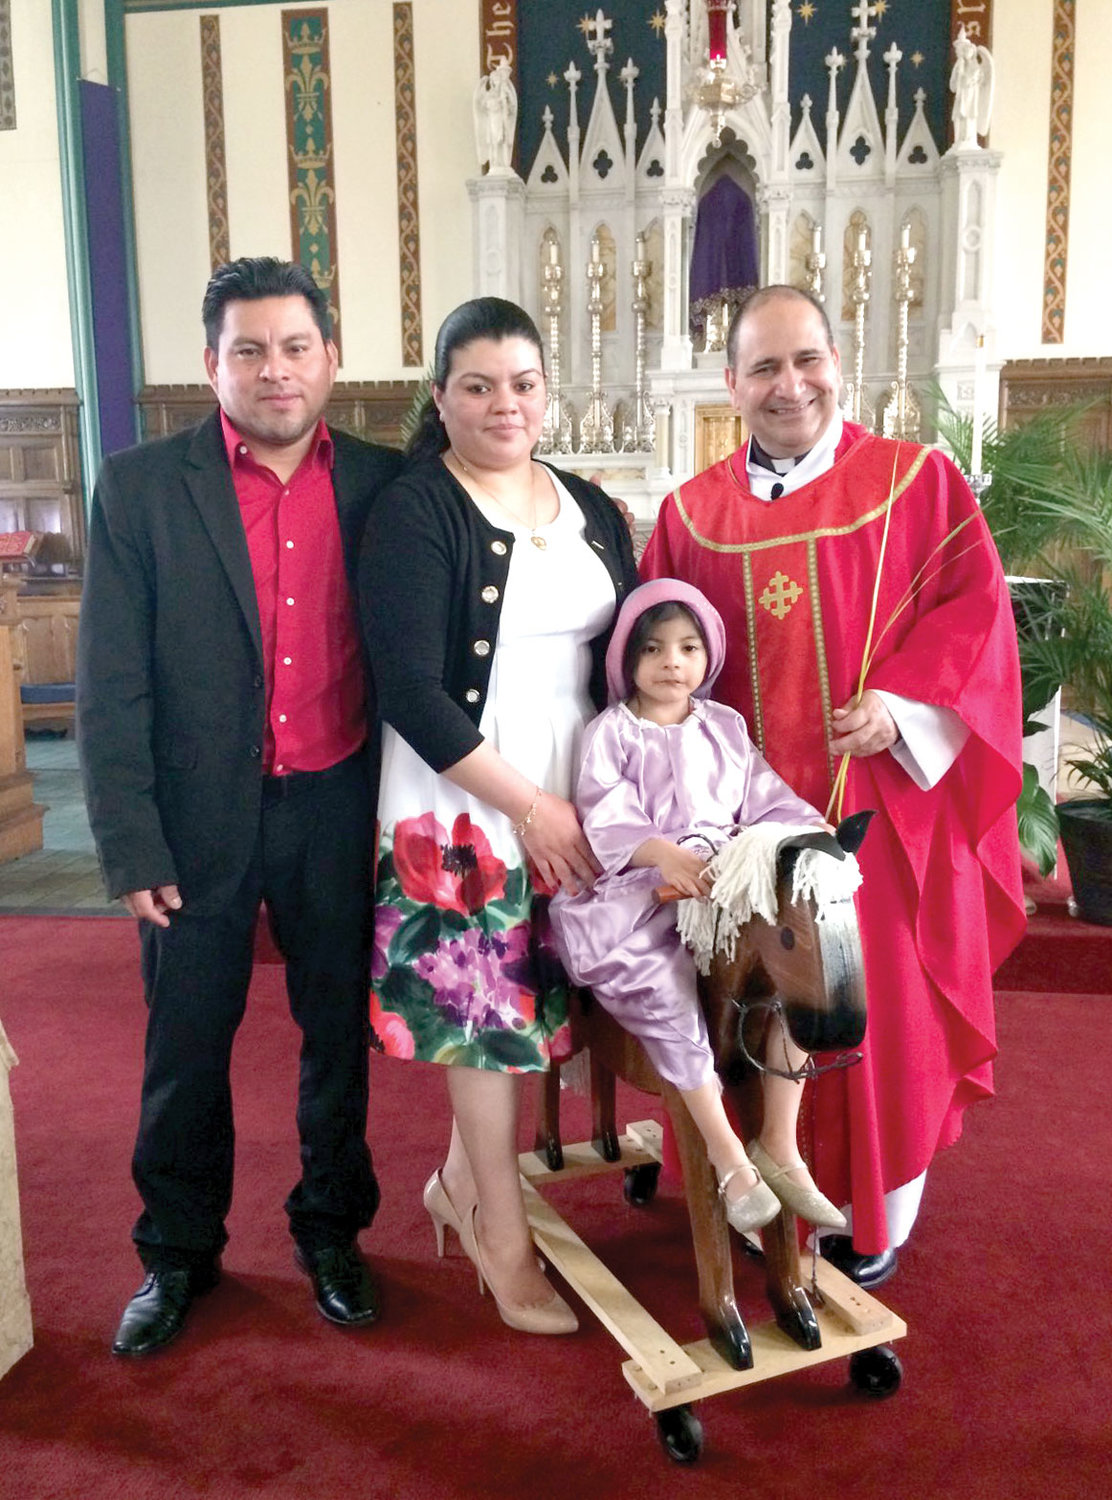 IN CHURCH—Father Pichardo greets parishioners Freddy and Veronica Baide and their daughter Katie after a Mass last December at St. Mary-St. Peter parish in Kingston.